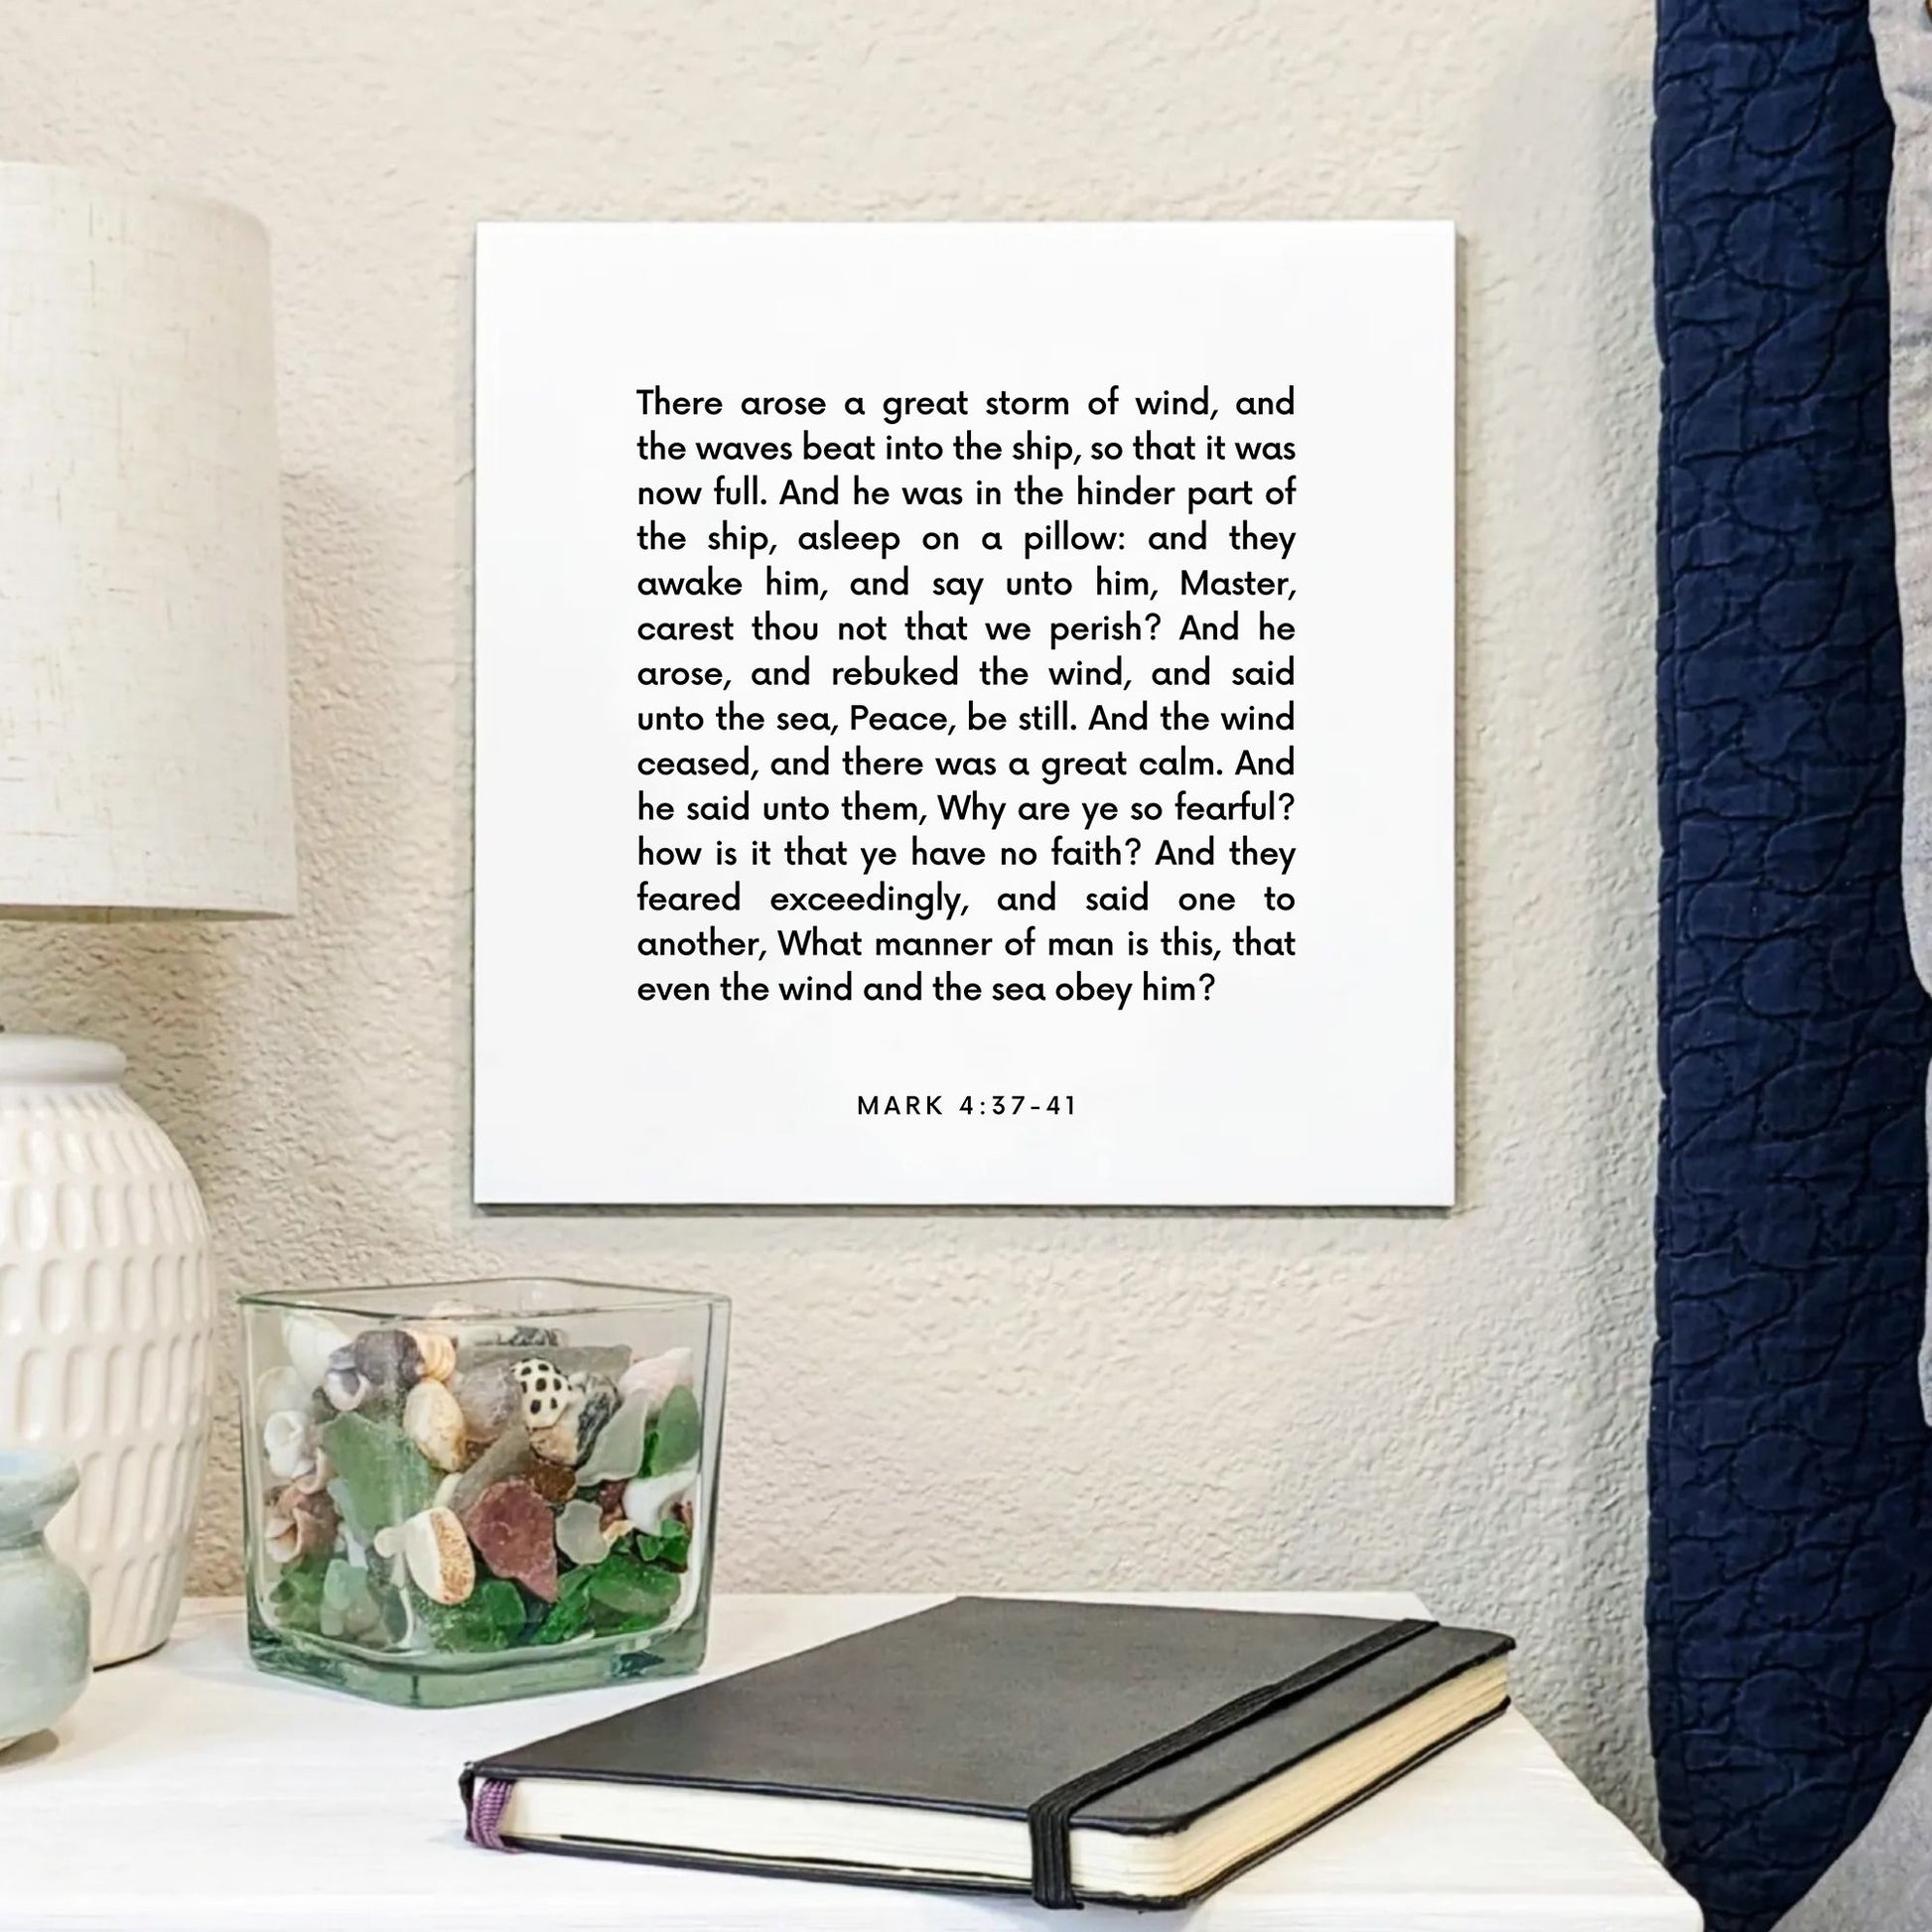 Bedside mouting of the scripture tile for Mark 4:37-41 - "Even the wind and the sea obey him"